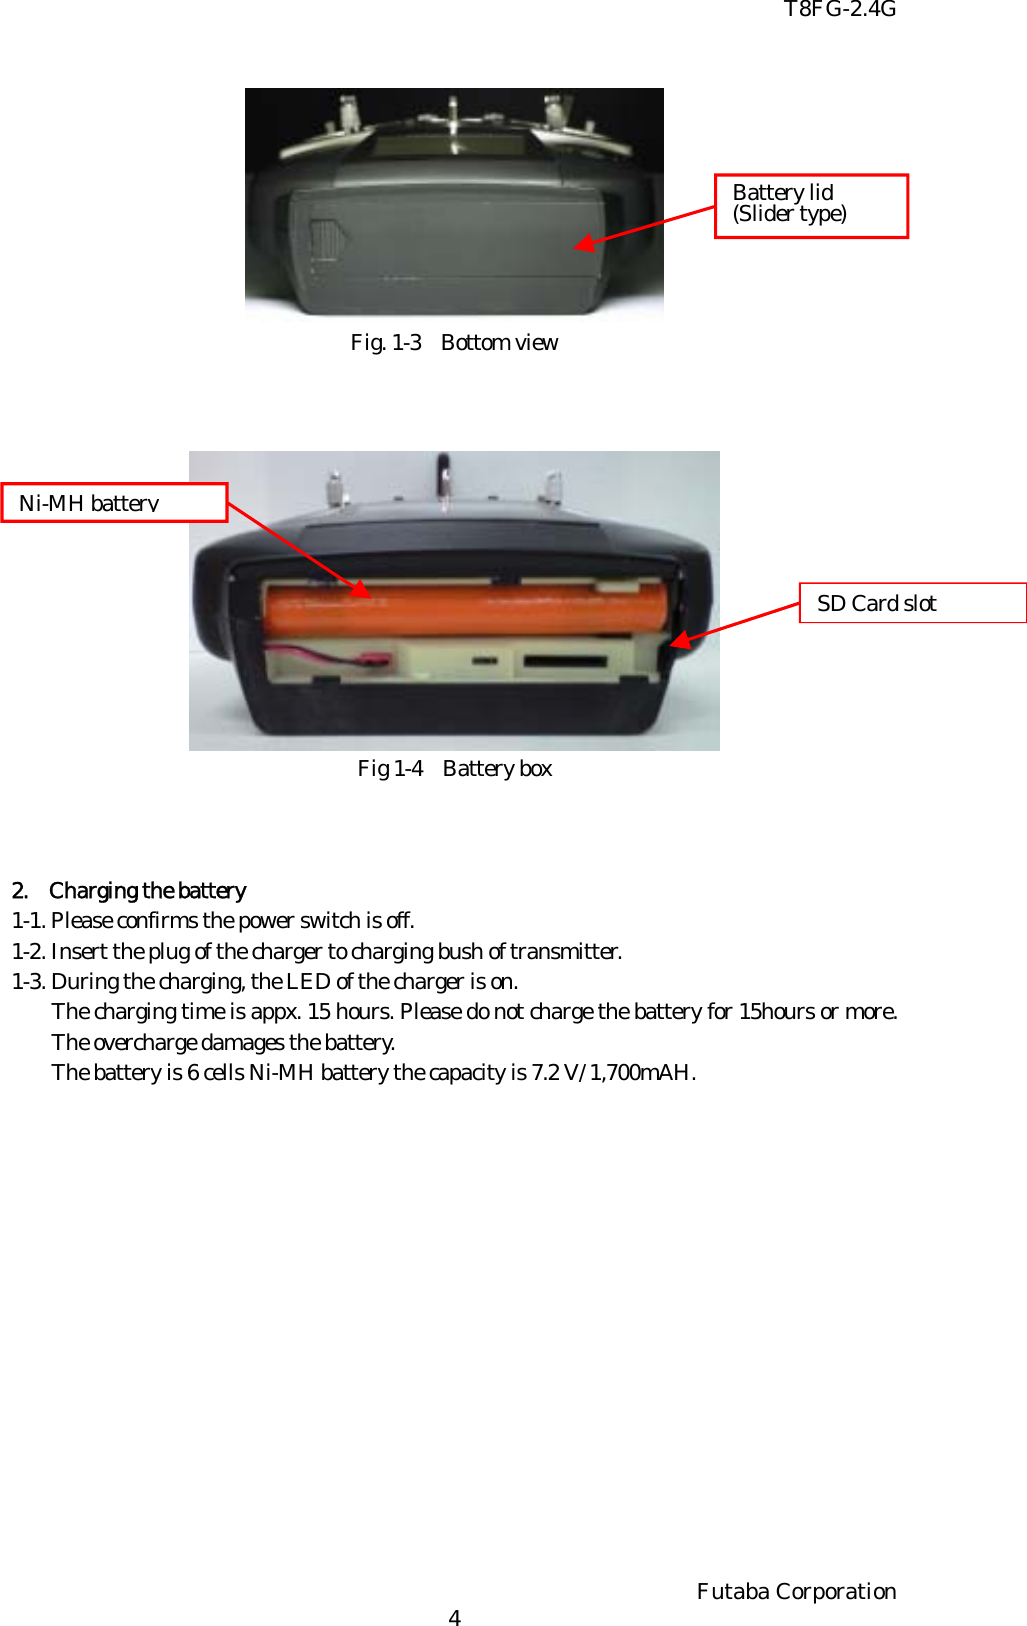 T8FG-2.4G  Battery lid (Slider type) Fig. 1-3 Bottom view     Ni-MH battery SD Card slot Fig 1-4 Battery box    2.  Charging the battery 1-1. Please confirms the power switch is off.   1-2. Insert the plug of the charger to charging bush of transmitter. 1-3. During the charging, the LED of the charger is on.  The charging time is appx. 15 hours. Please do not charge the battery for 15hours or more. The overcharge damages the battery. The battery is 6 cells Ni-MH battery the capacity is 7.2 V/ 1,700mAH.  Futaba Corporation   4 